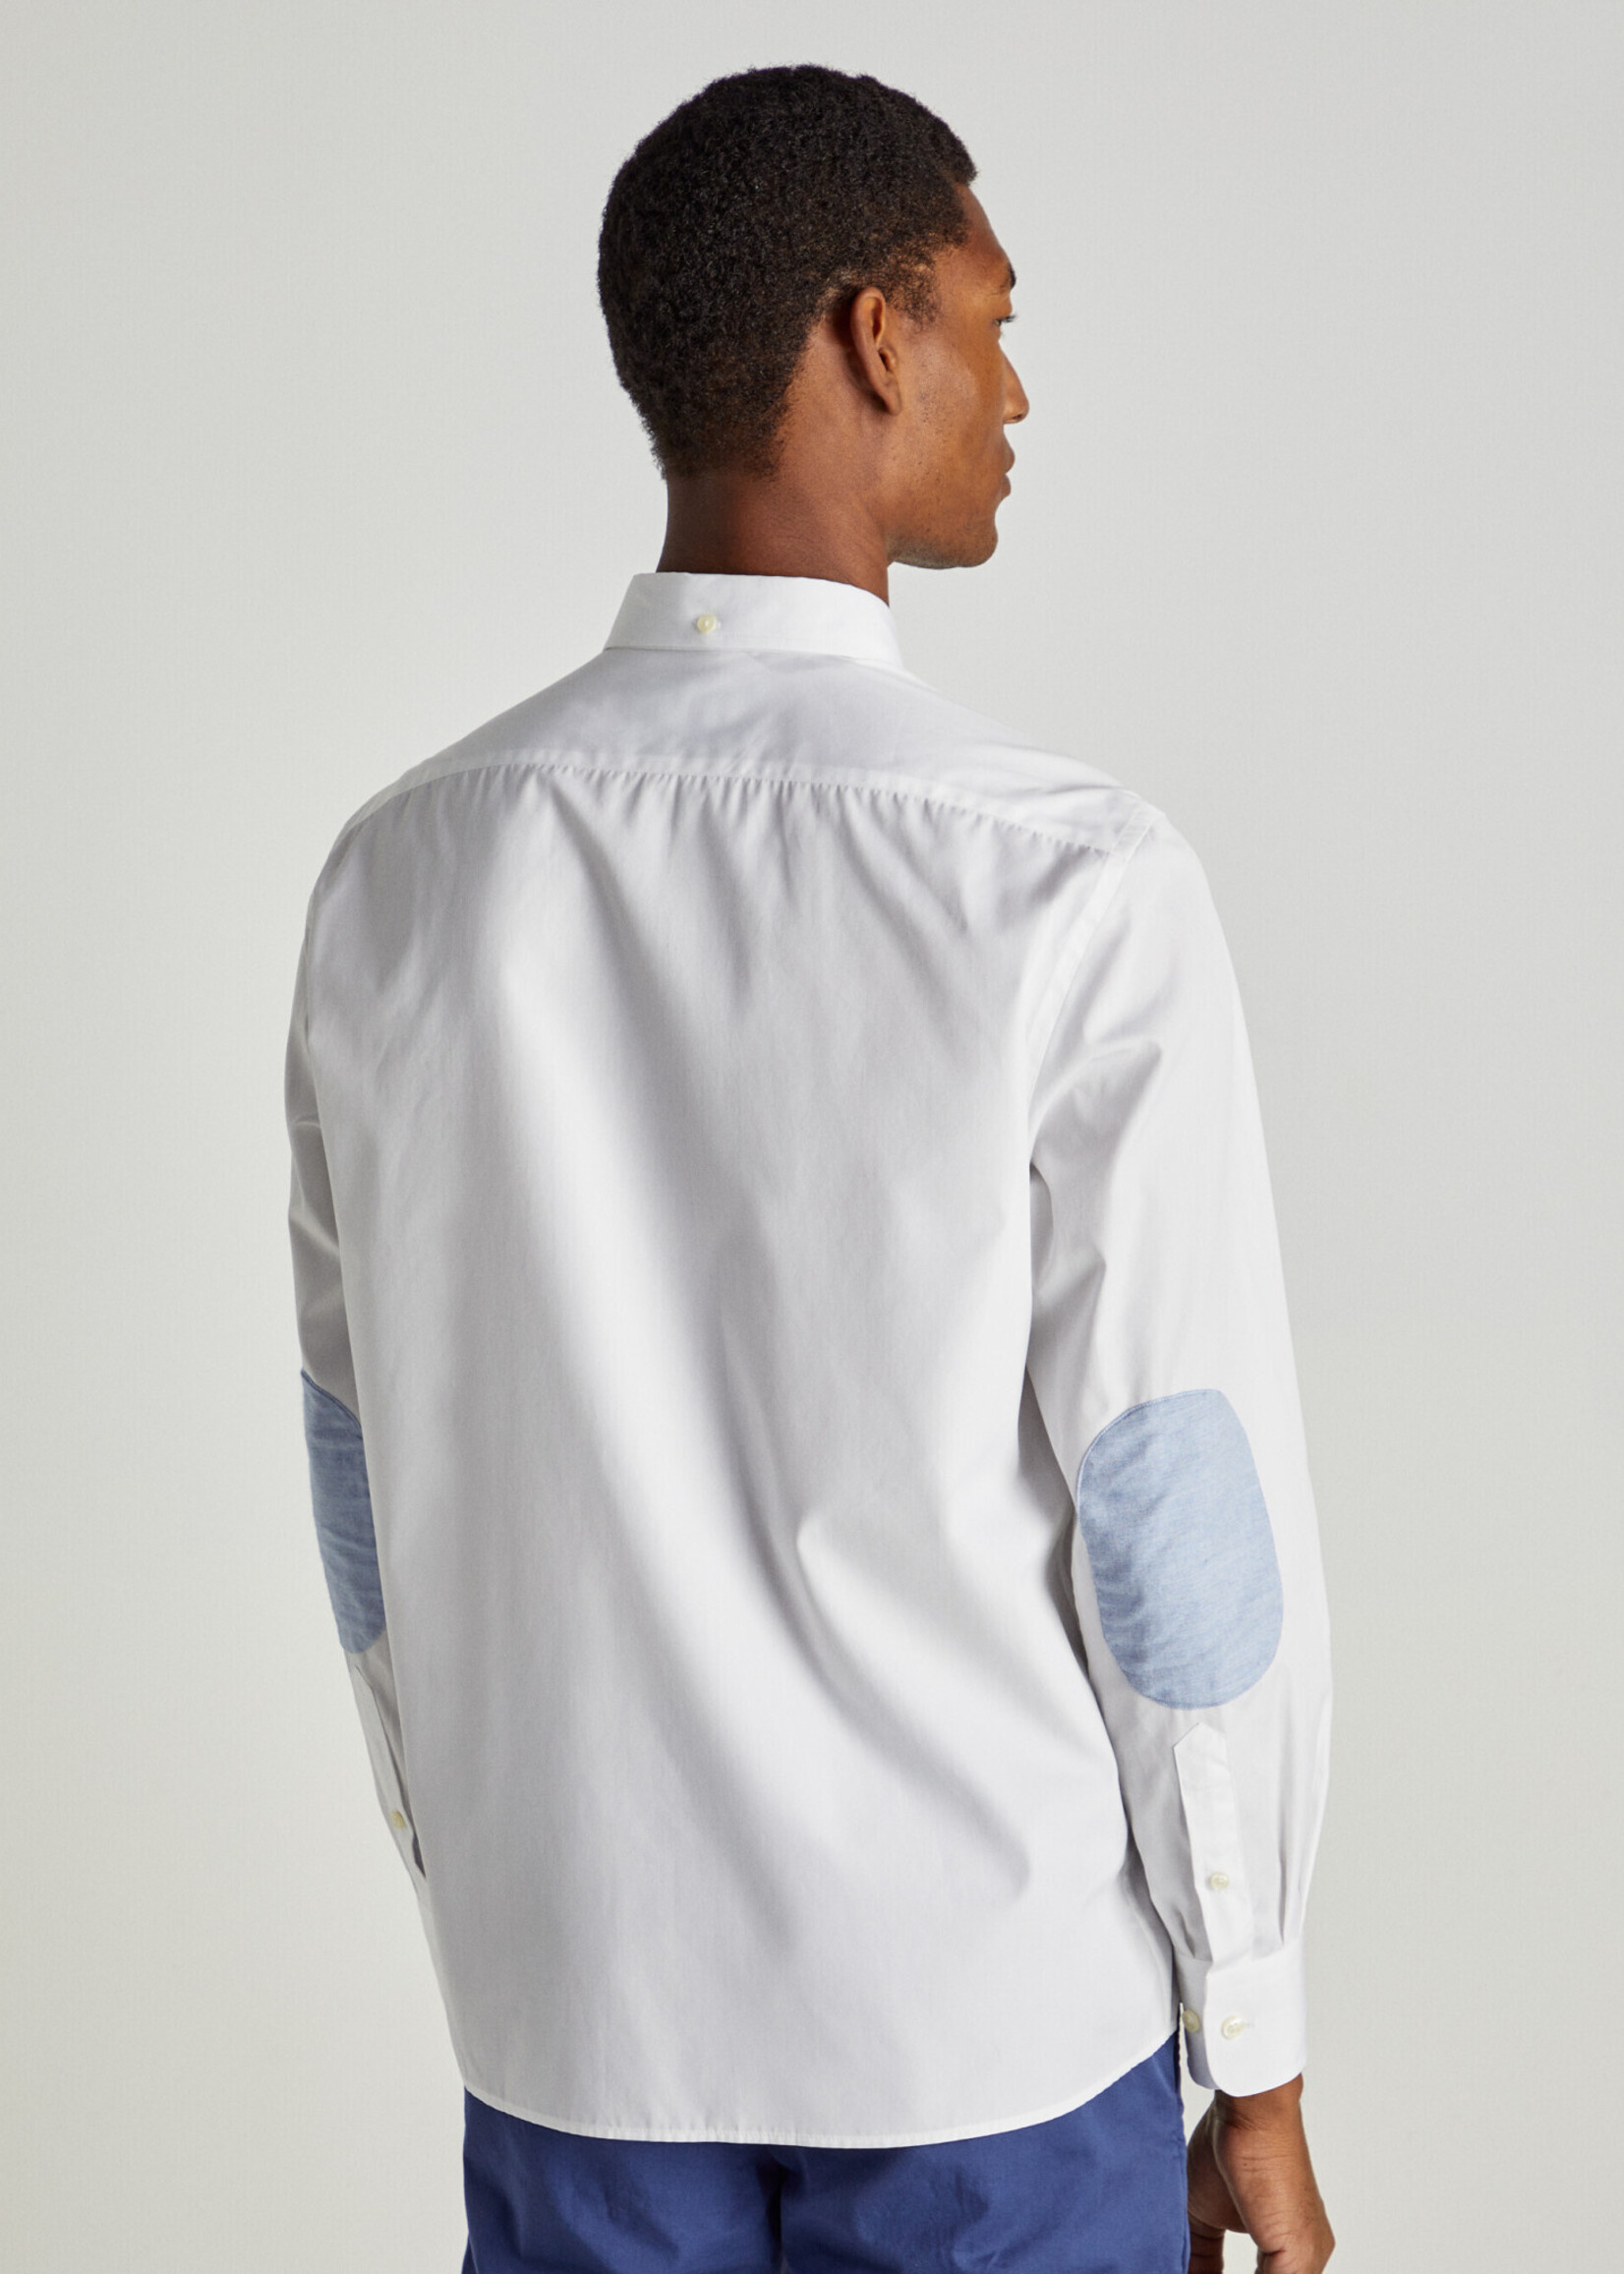 FAÇONNABLE Poplin Shirt With Elbow Patches - White/blue